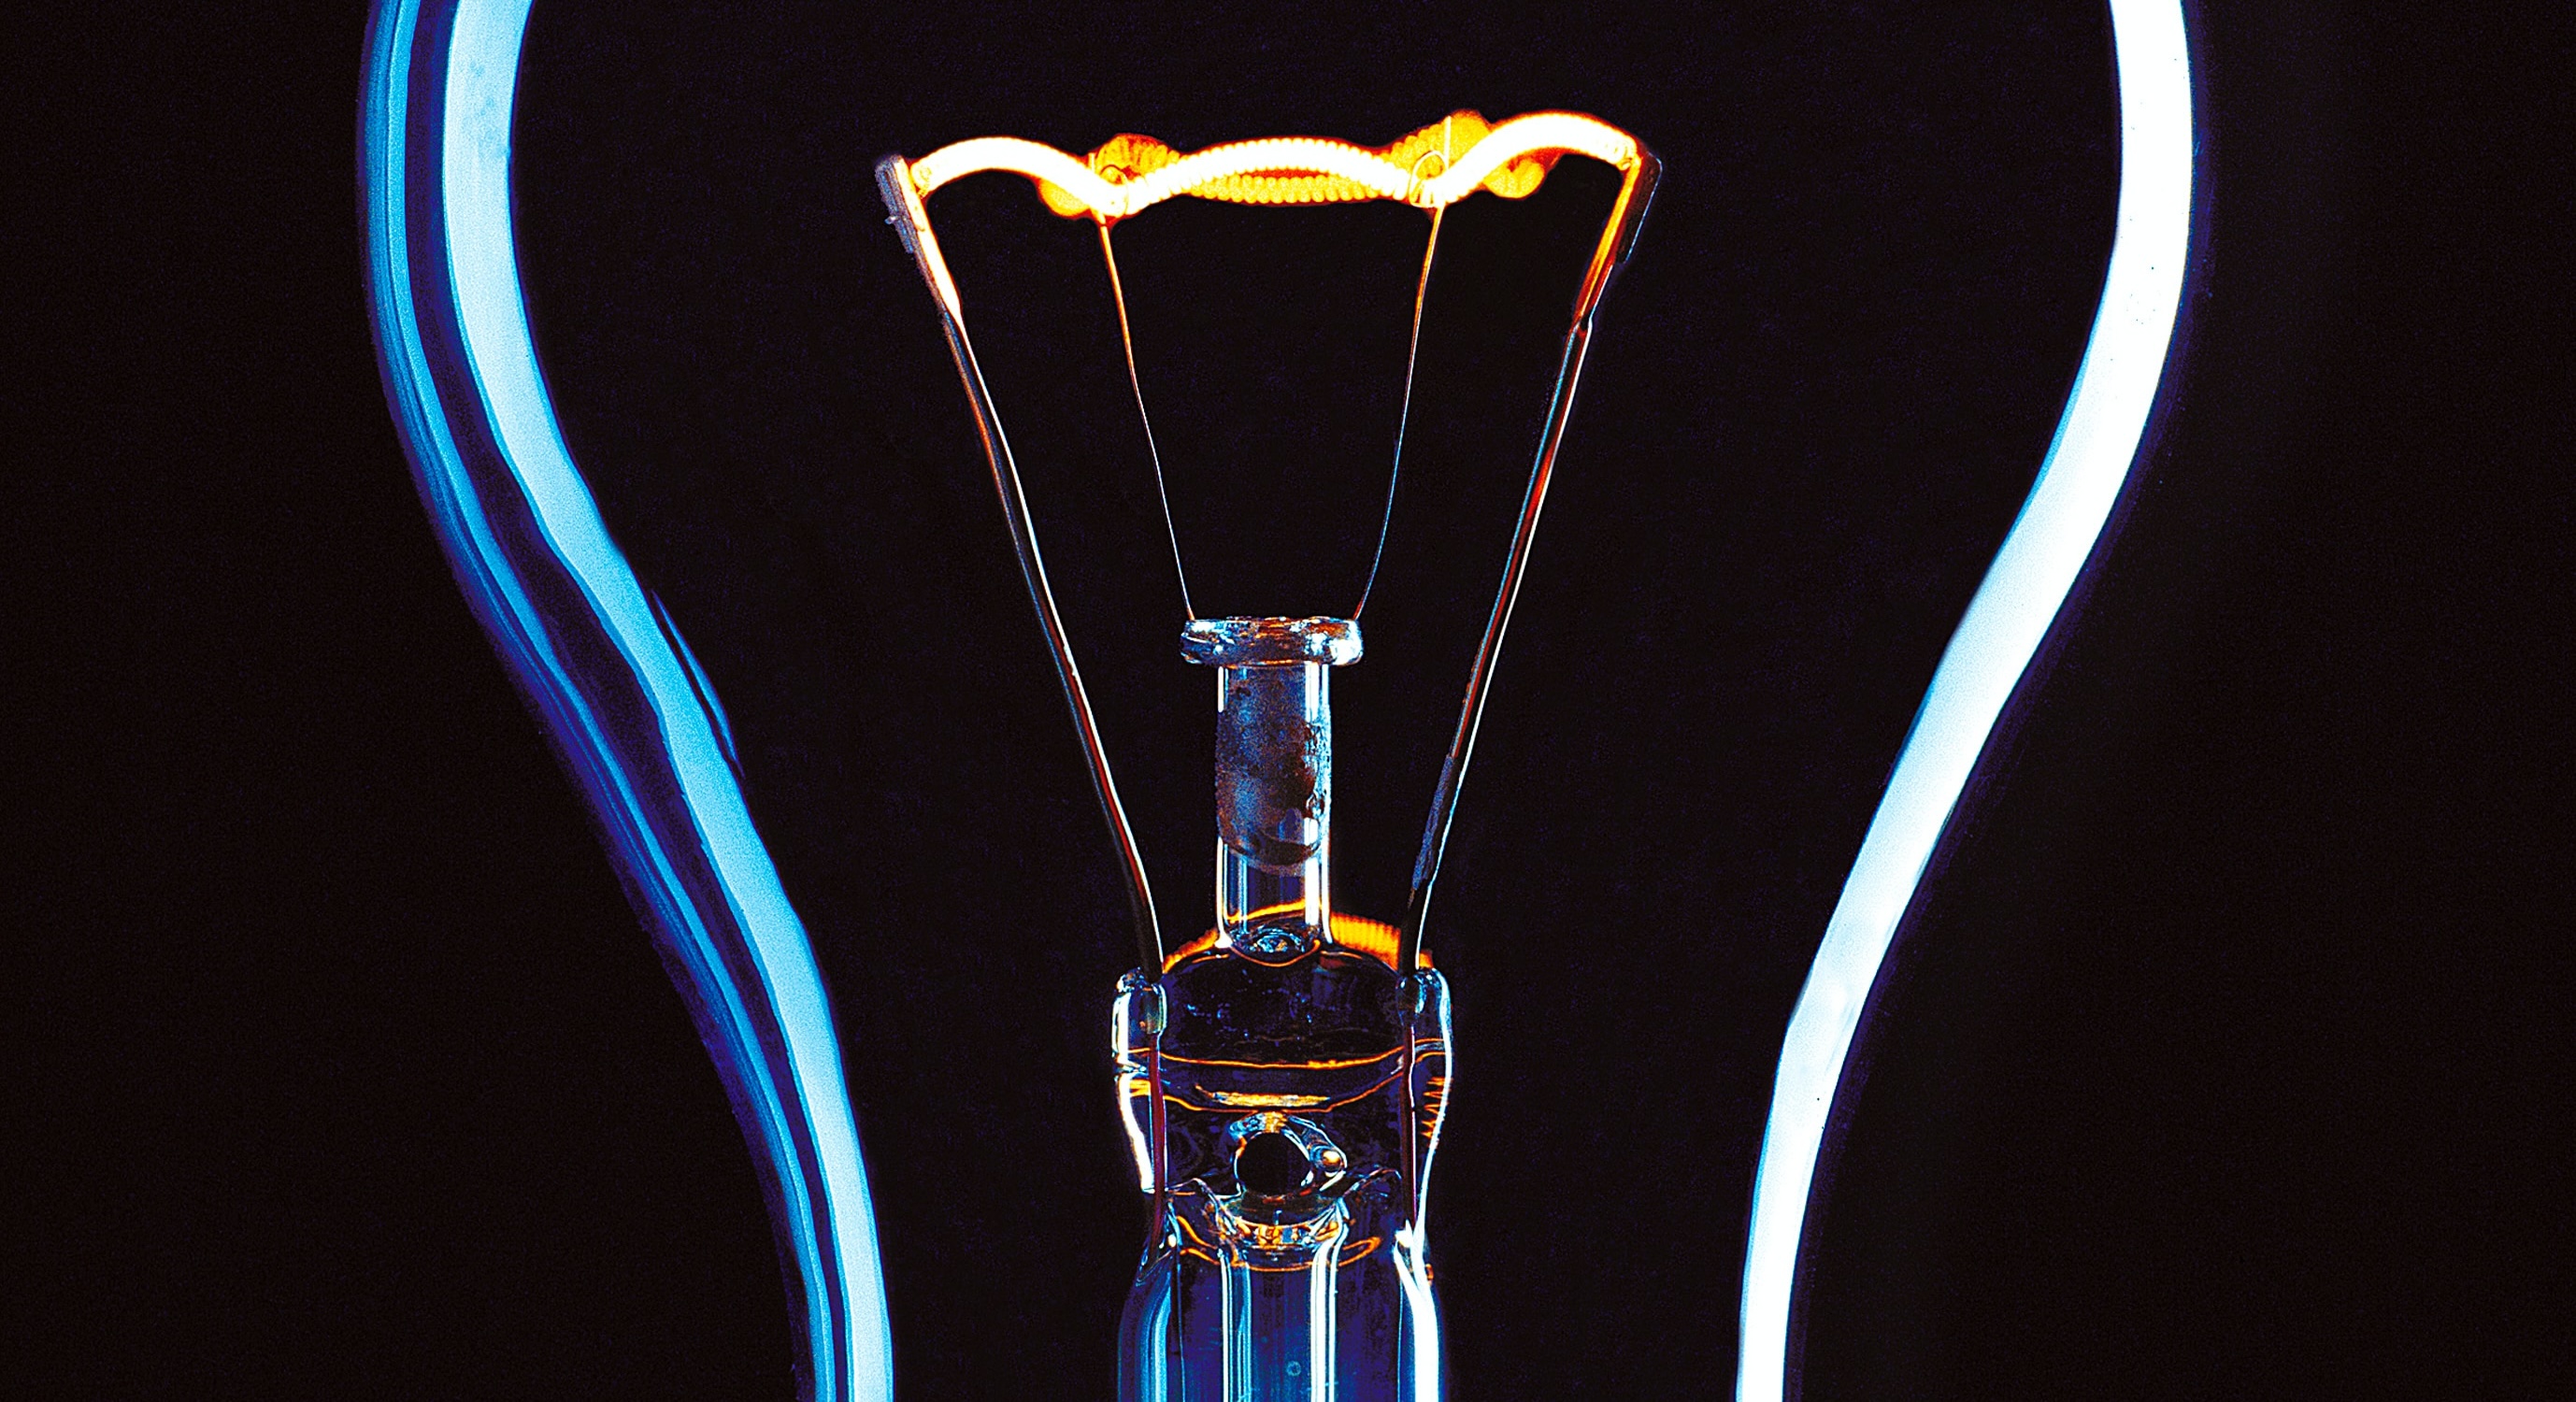 A photo of a lightbulb with a glowing filament against a black background.